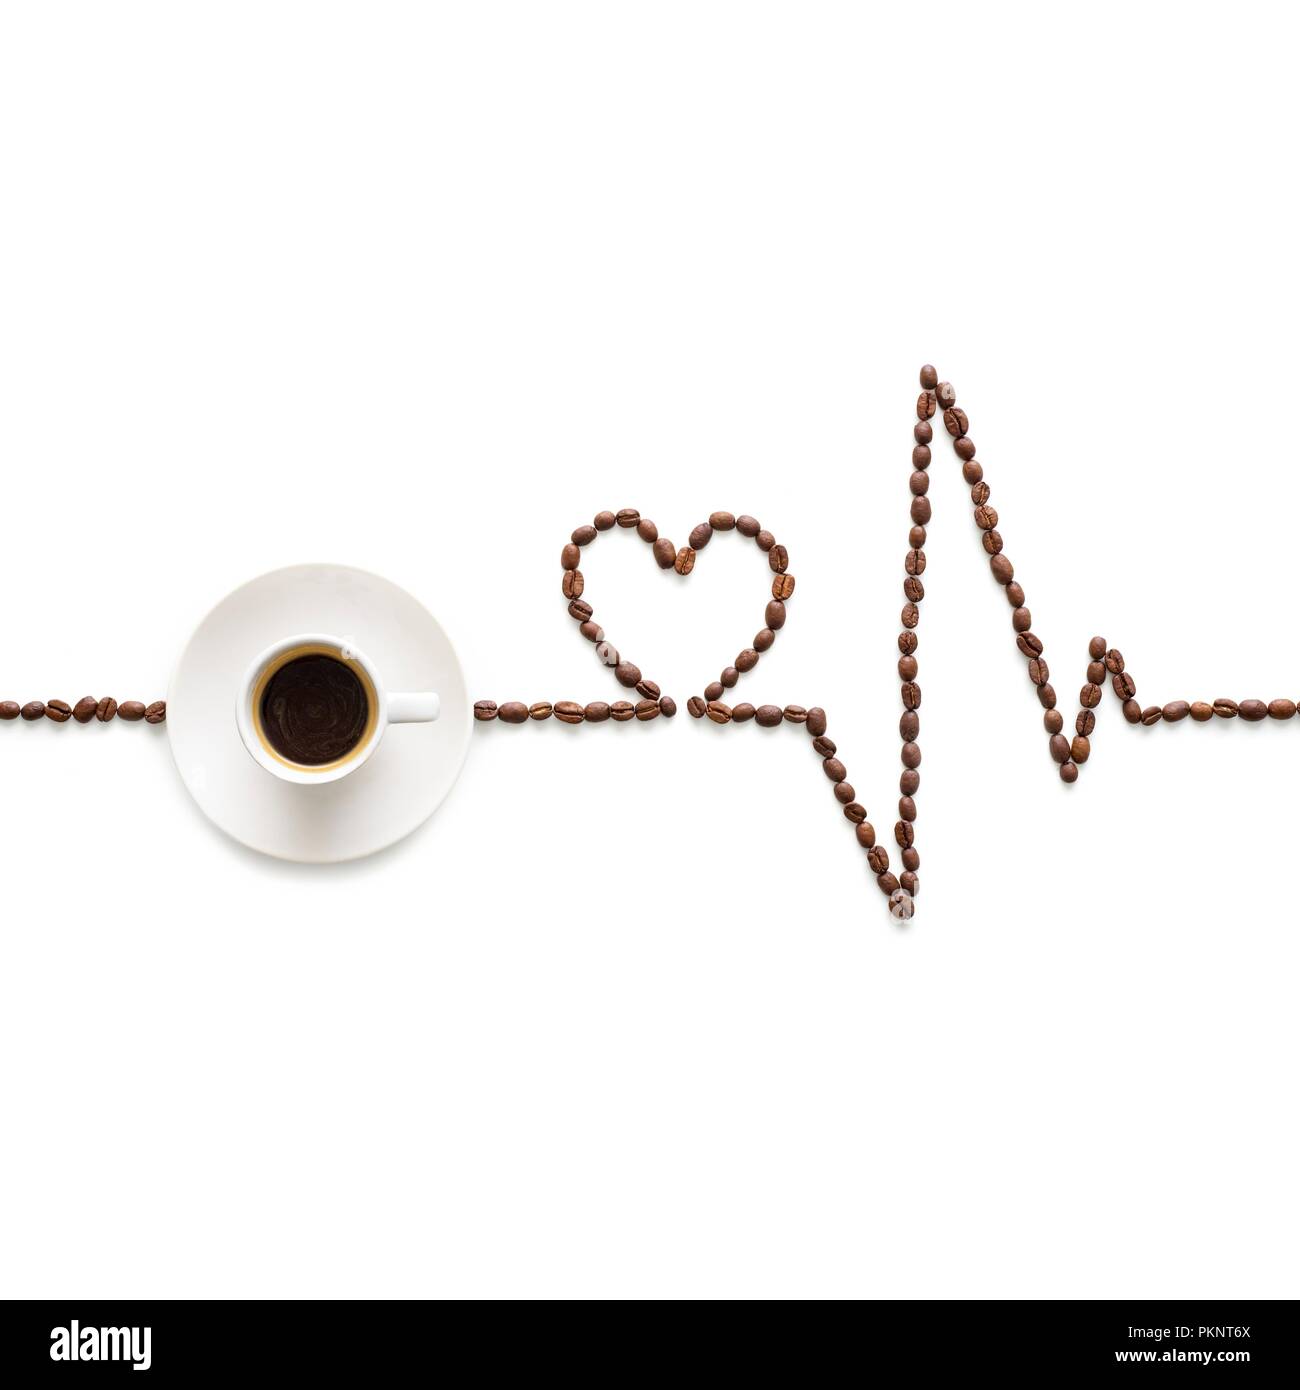 Coffee beans making an electrocardiogram line and heart shape, with a cup of coffee. Stock Photo